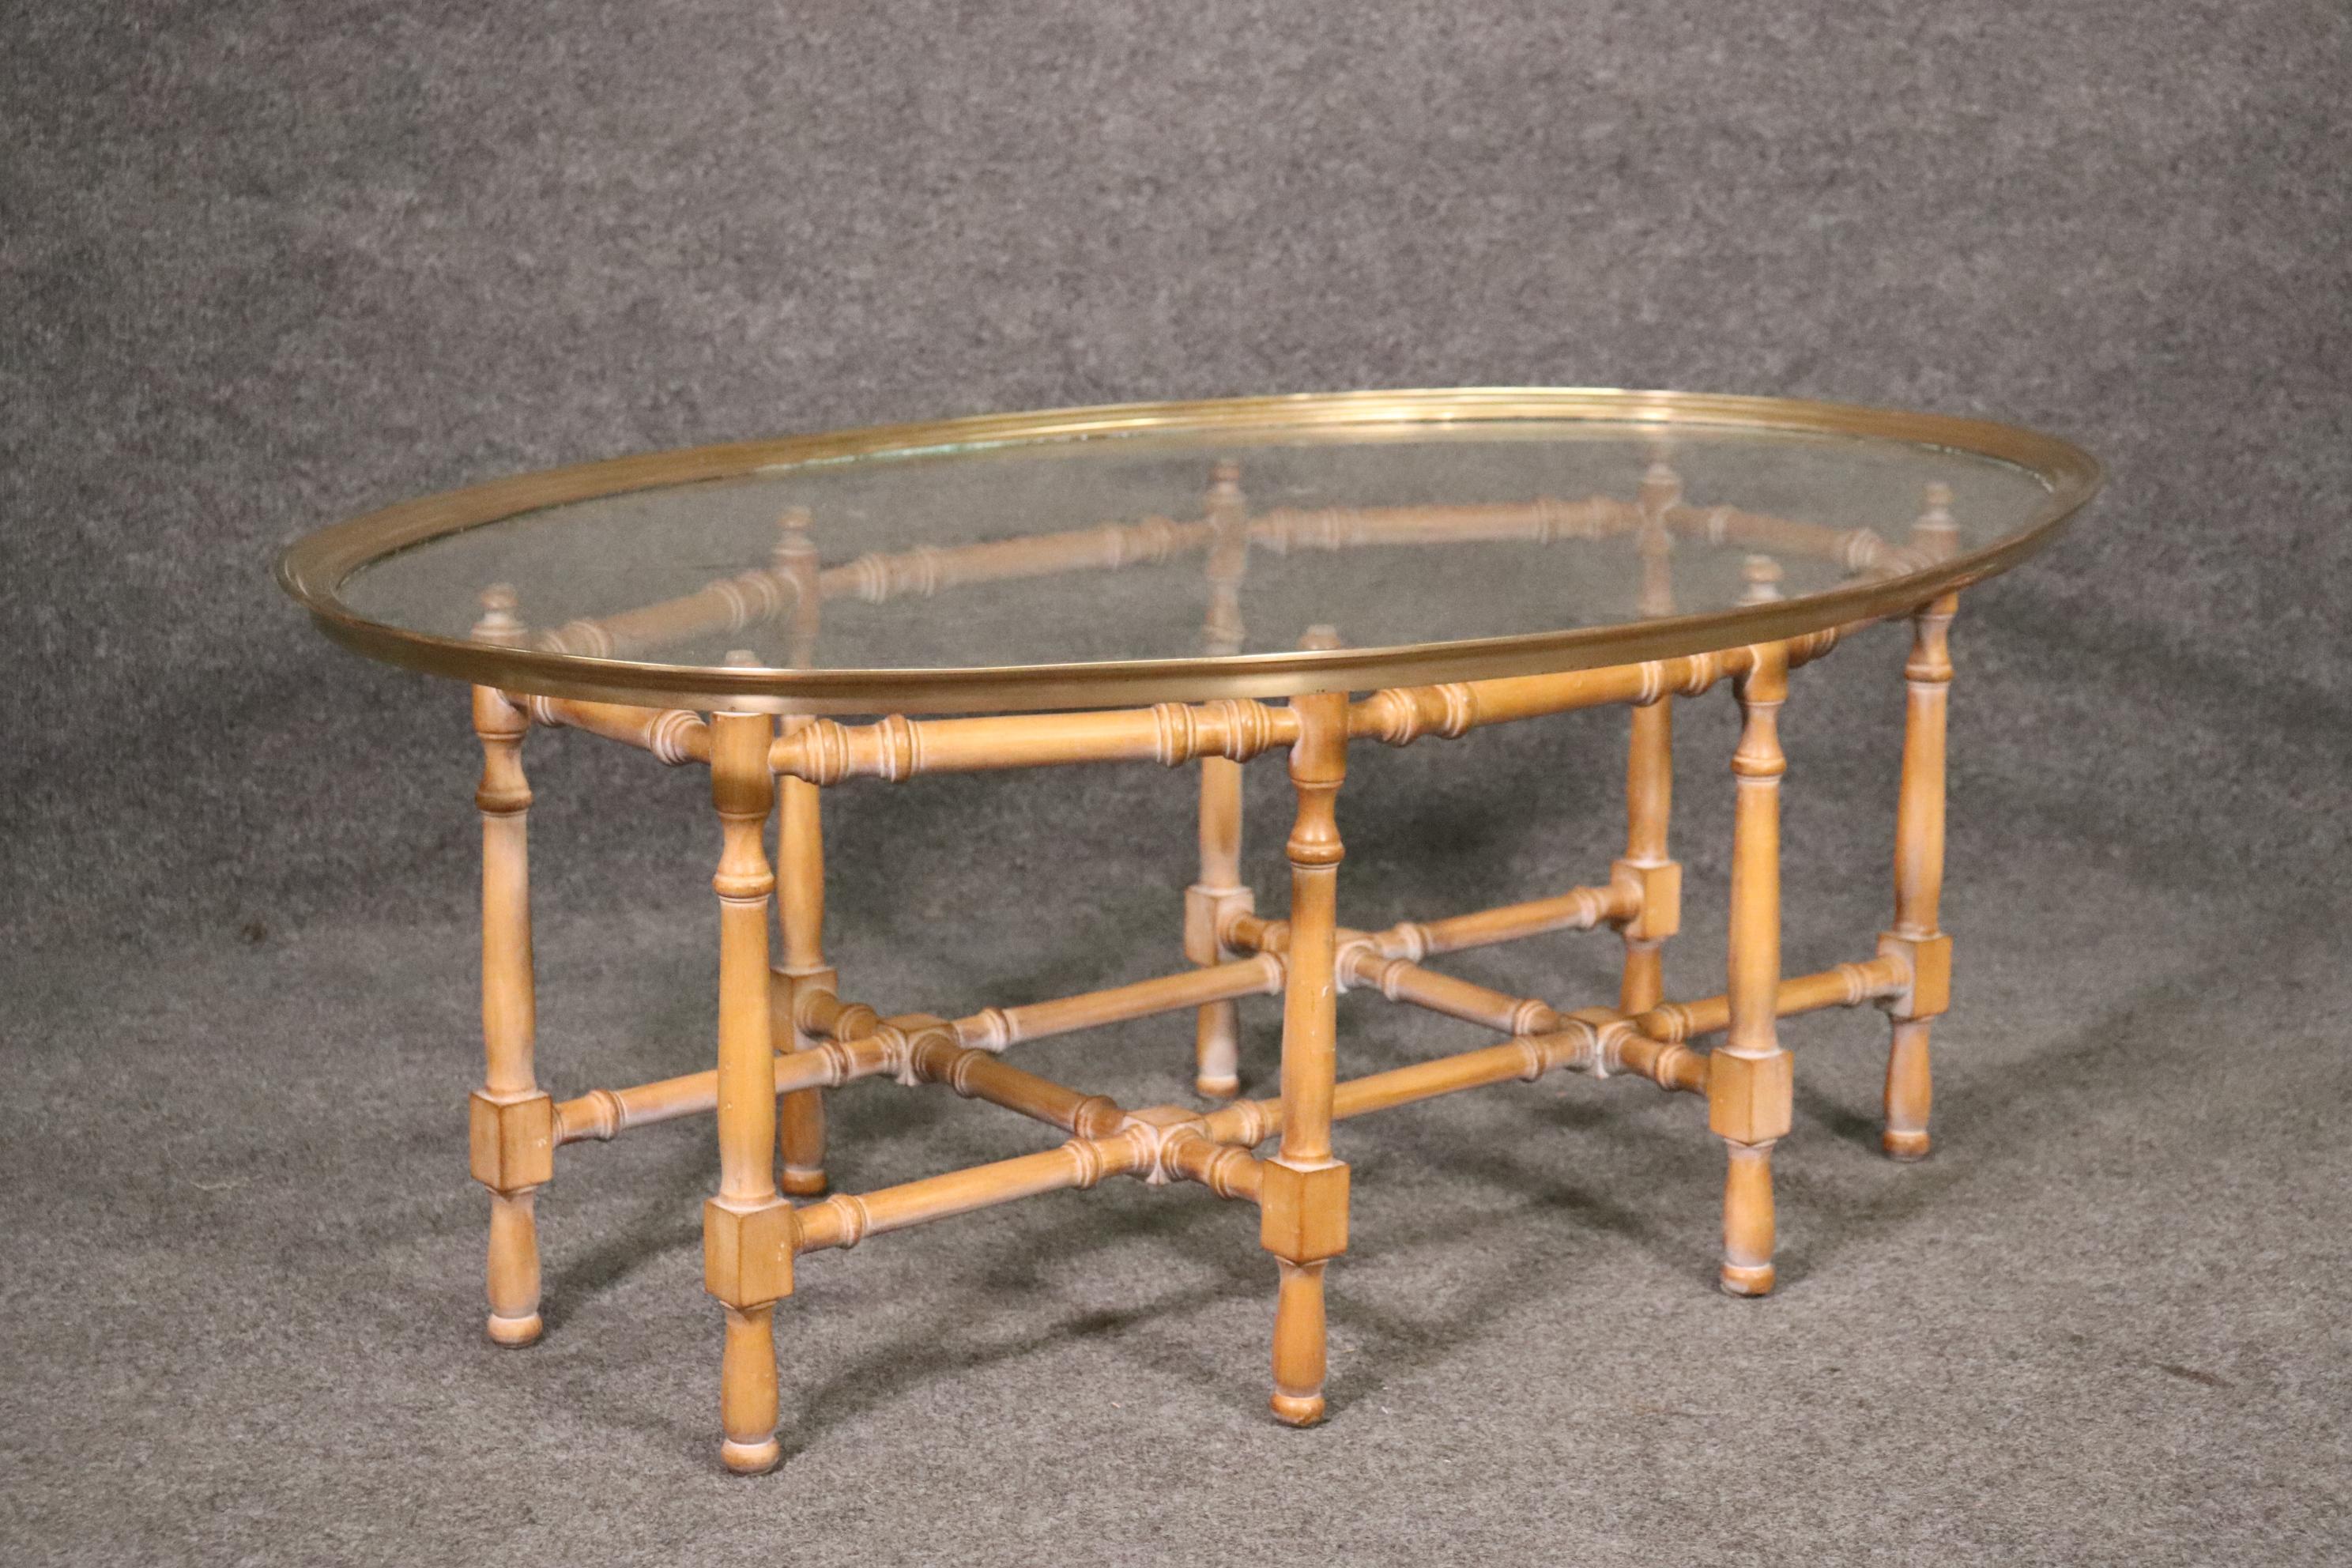 This is an unlabled but most certainly Baker tray top Faux Bamboo cocktail coffee table. The coffee table is an absolute classic and in good condition. Measures 44 wide x 17 tall x 31 deep.